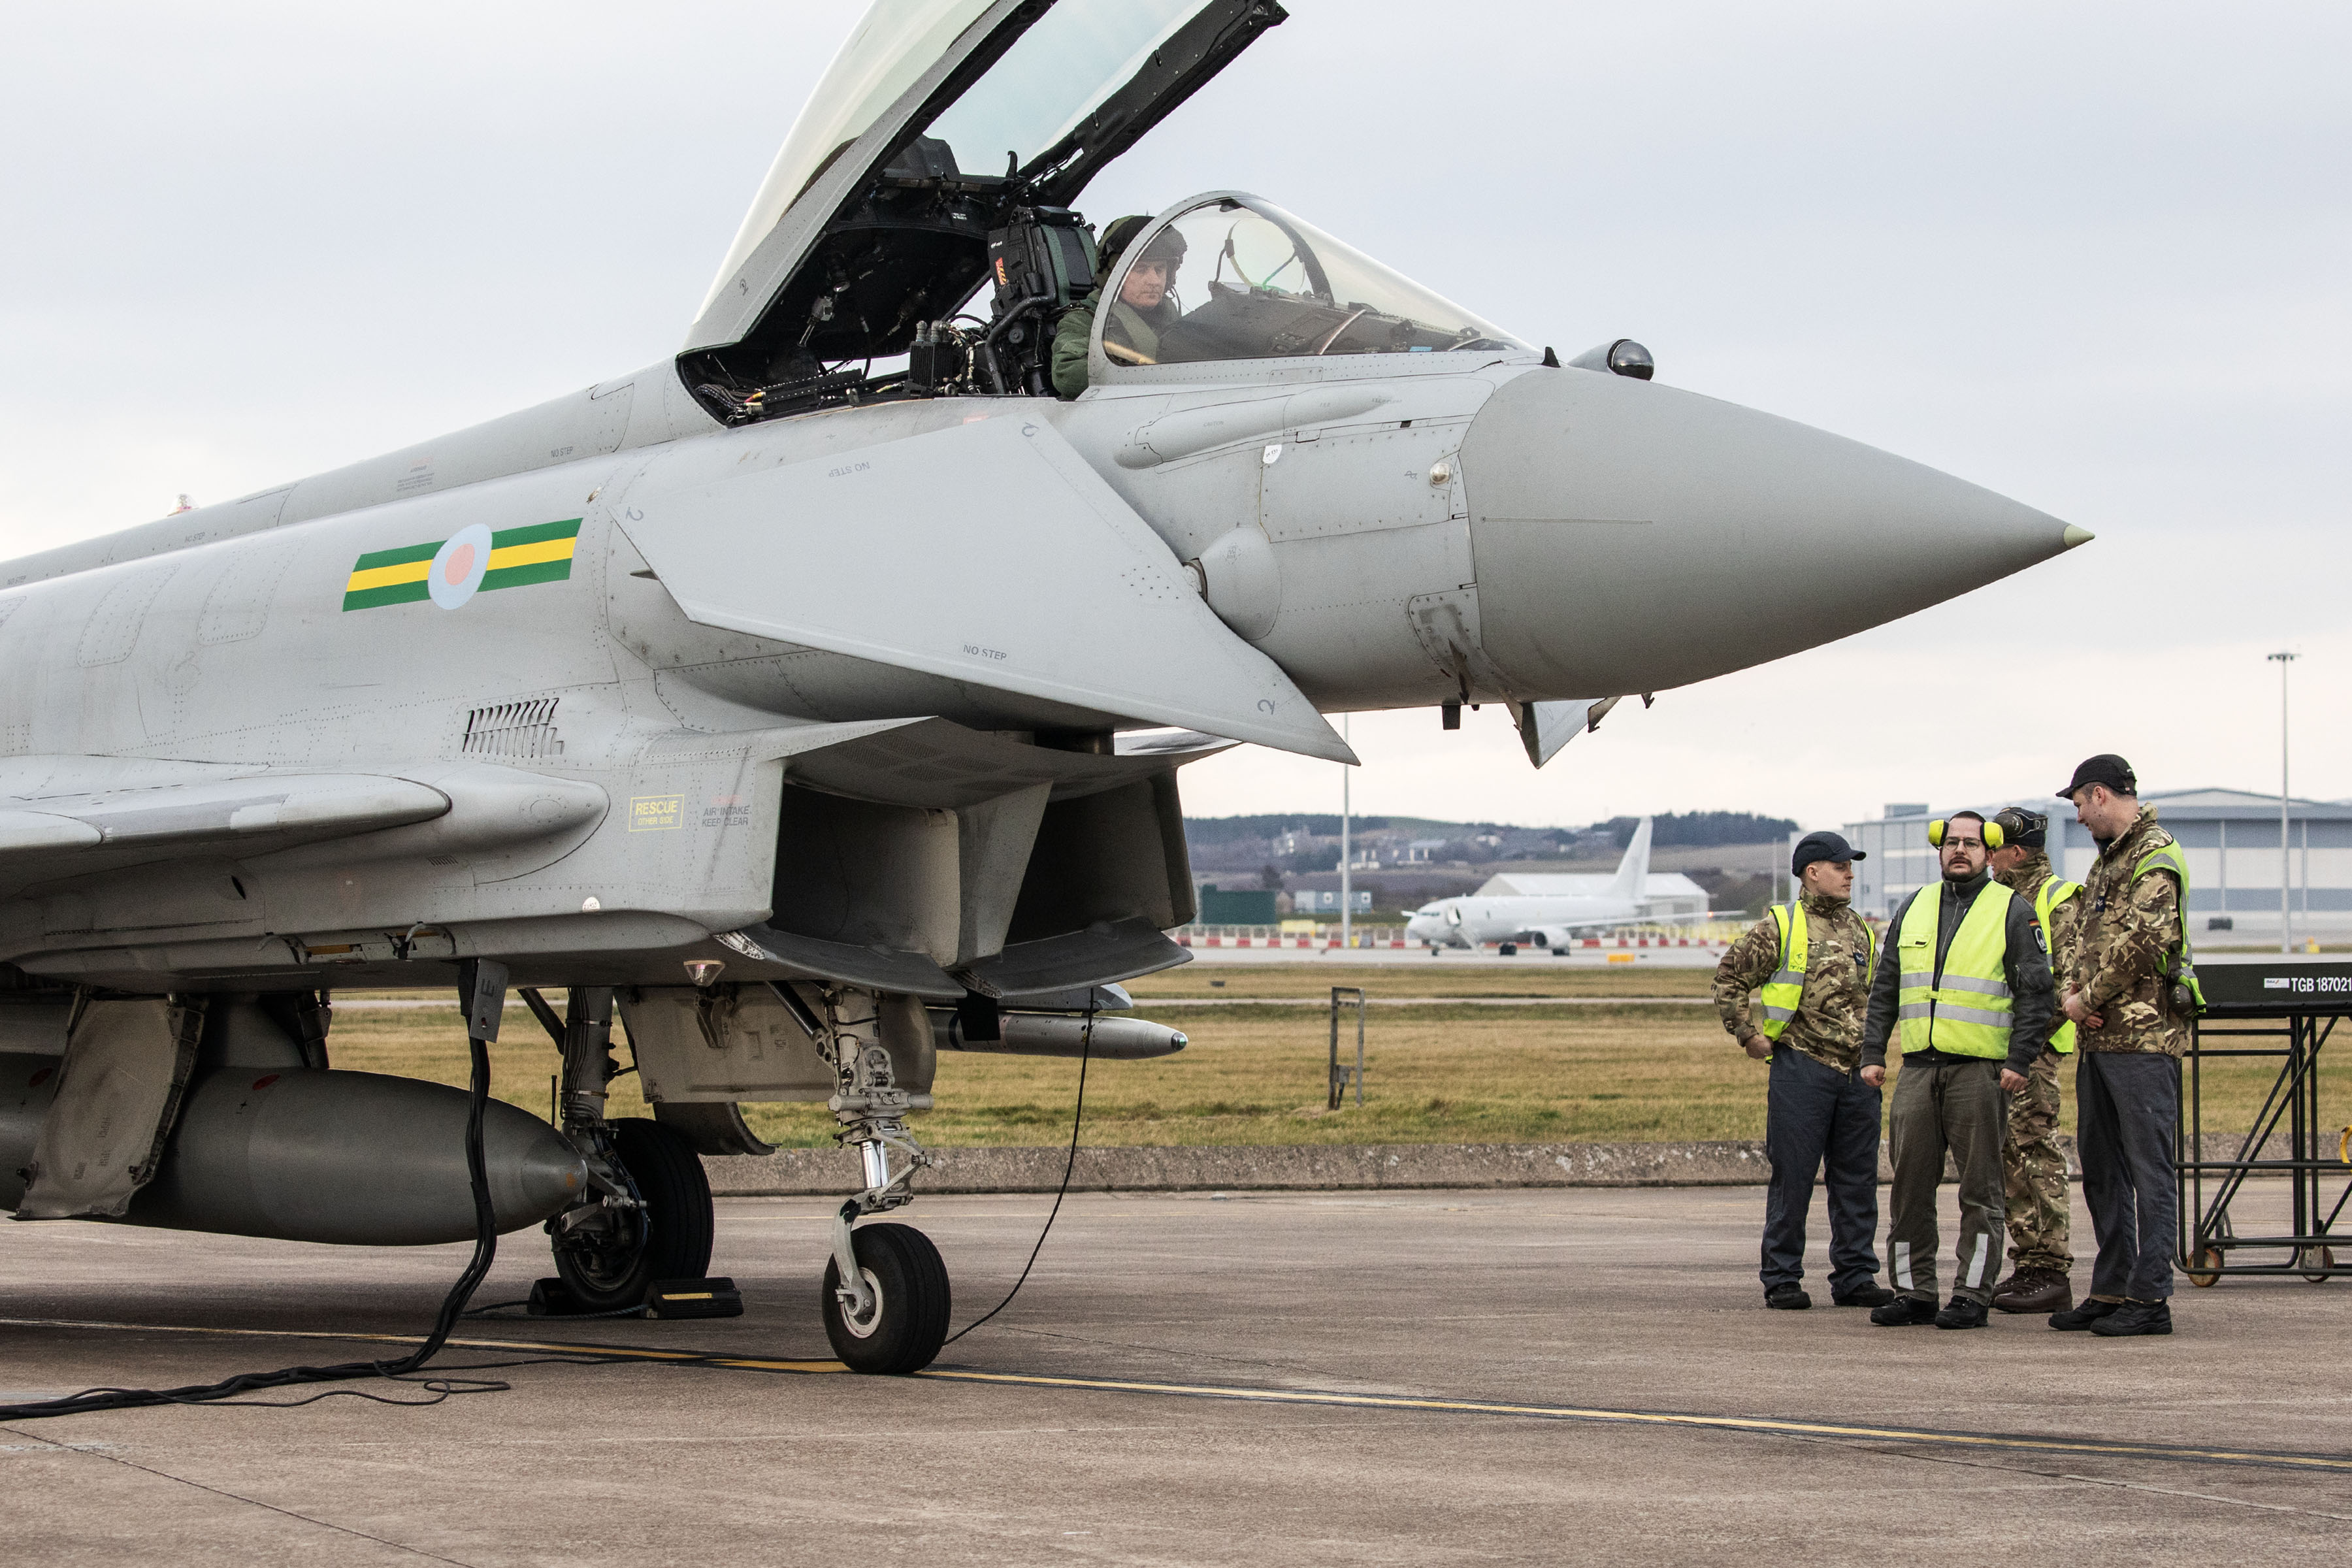 Image shows RAF aviators standing by a Typhoon with its cockpit open on the airfield.